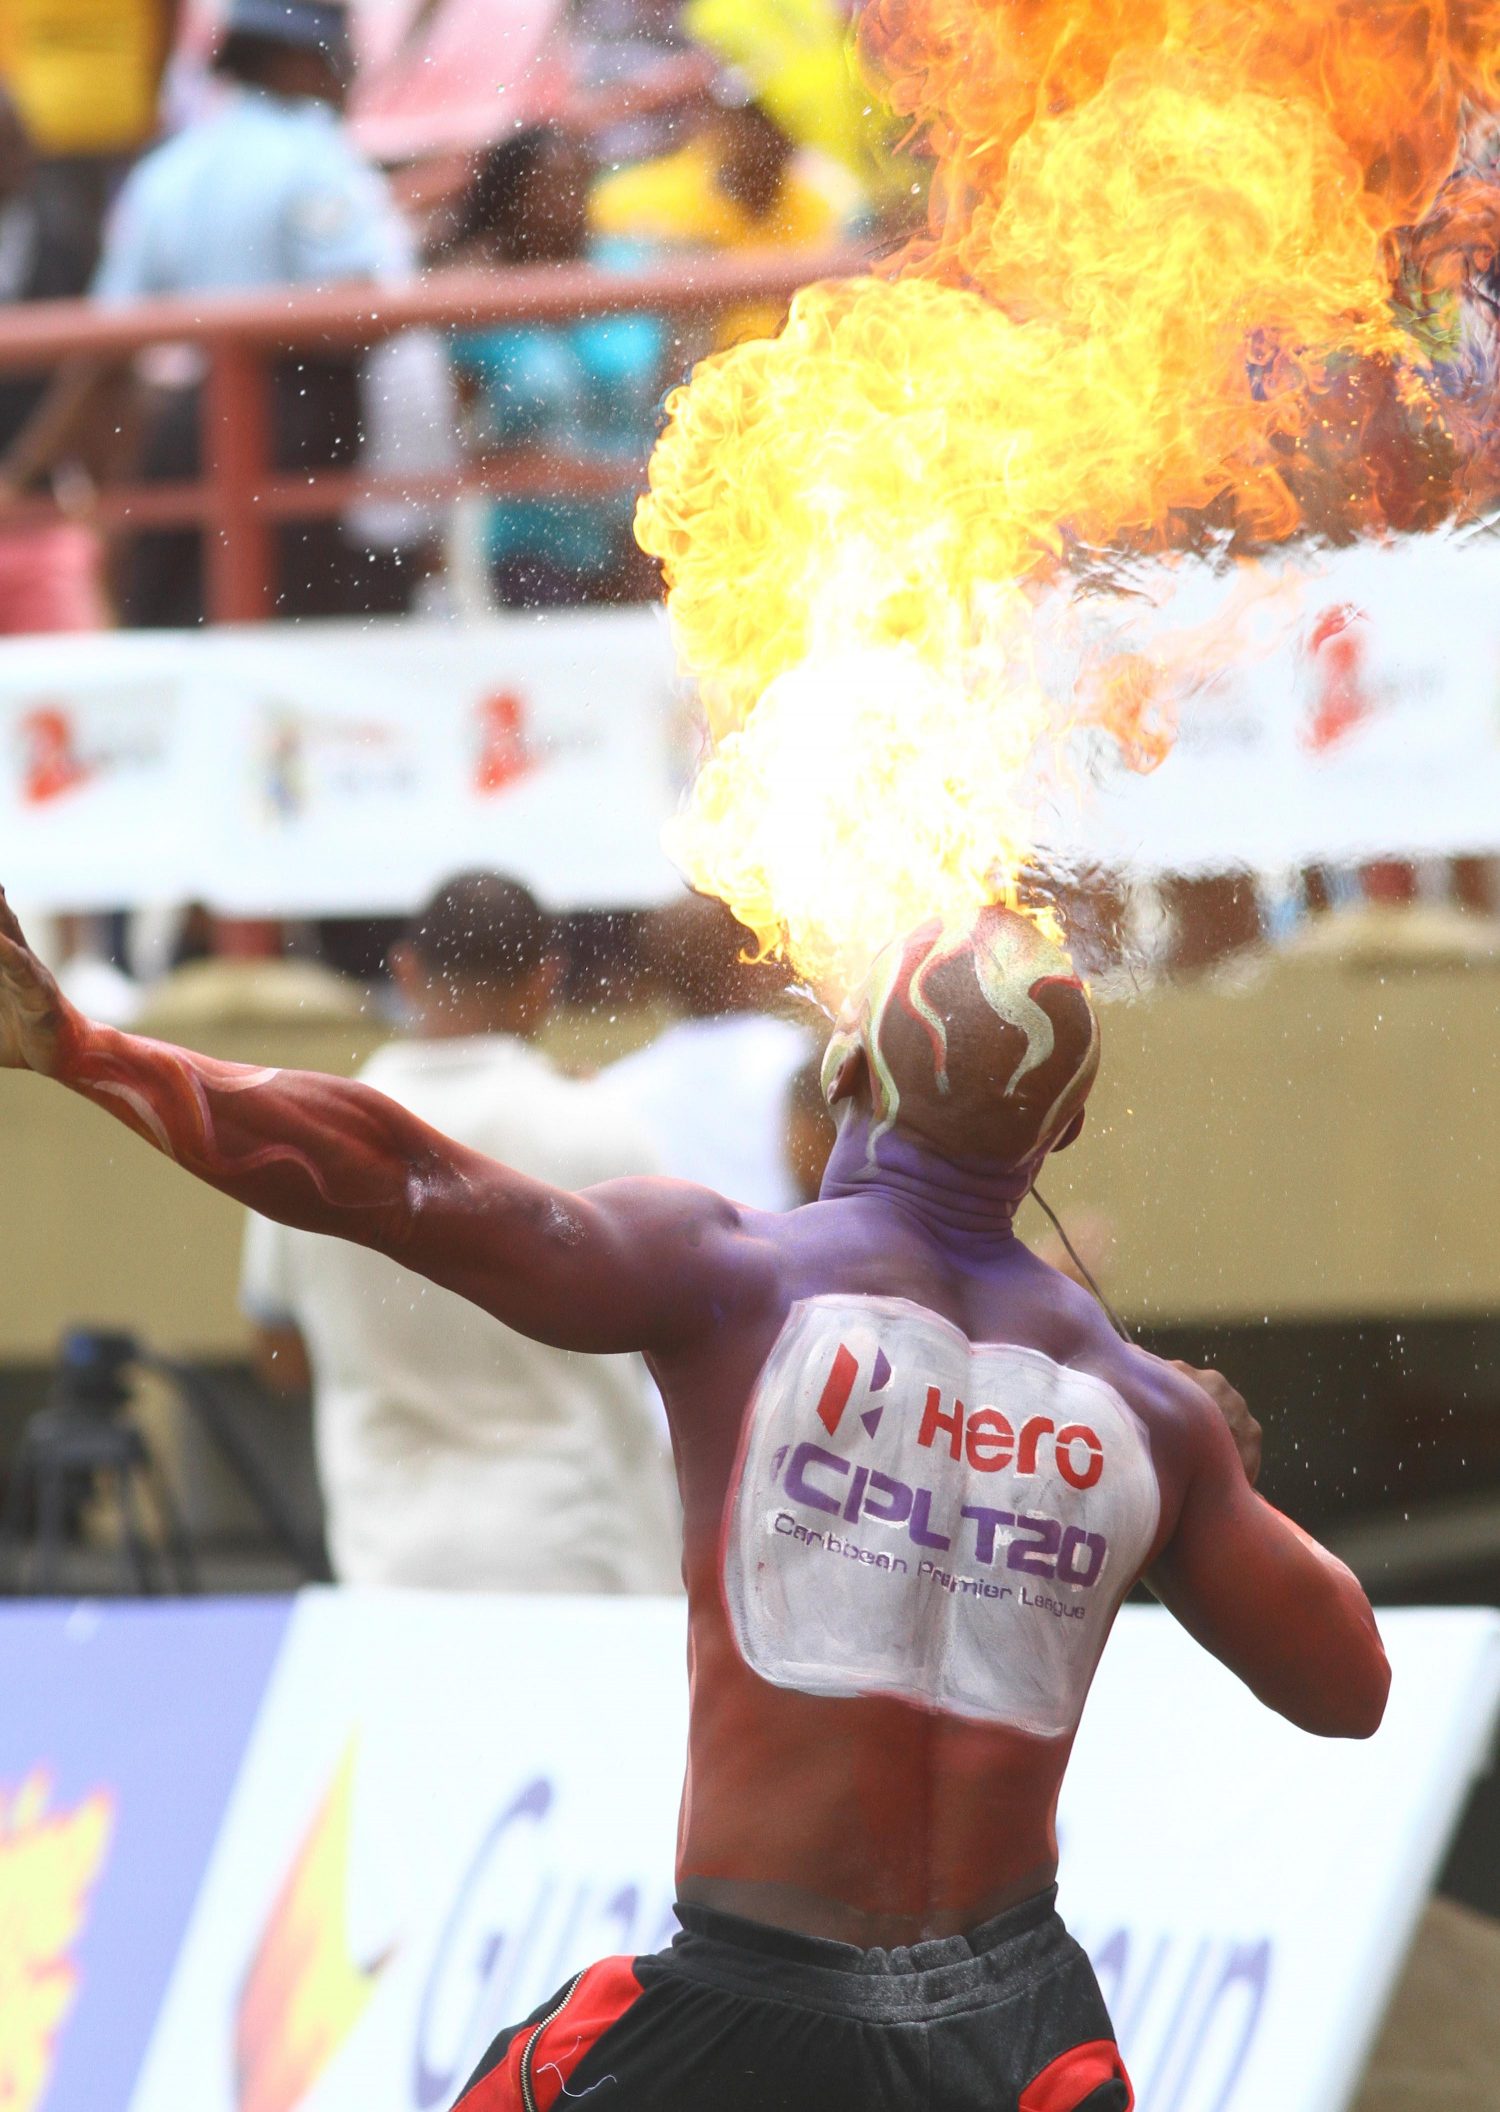 A fire eater entertains the crowd at yesterday’s CPL encounter between the Amazon Warriors and the Trinbago Knightriders  at the National Stadium, Providence (Orlando Charles photo)